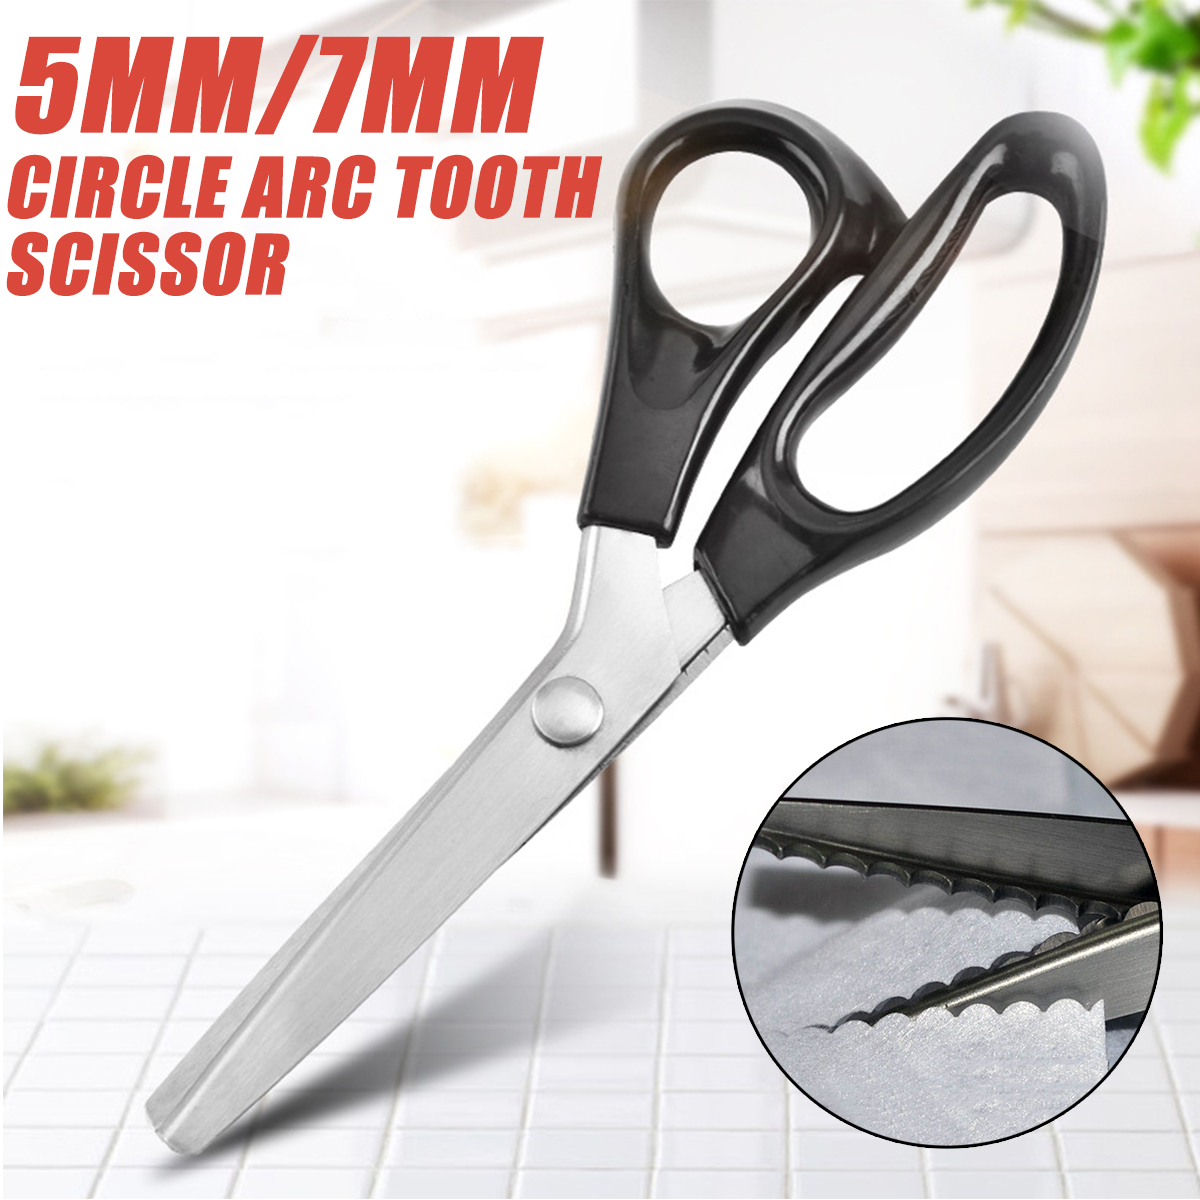 Circle-Arc-Tooth-Scissor-Leather-Handicraft-Fabric-Sewing-Shear-Cutting-ABS-1752122-2